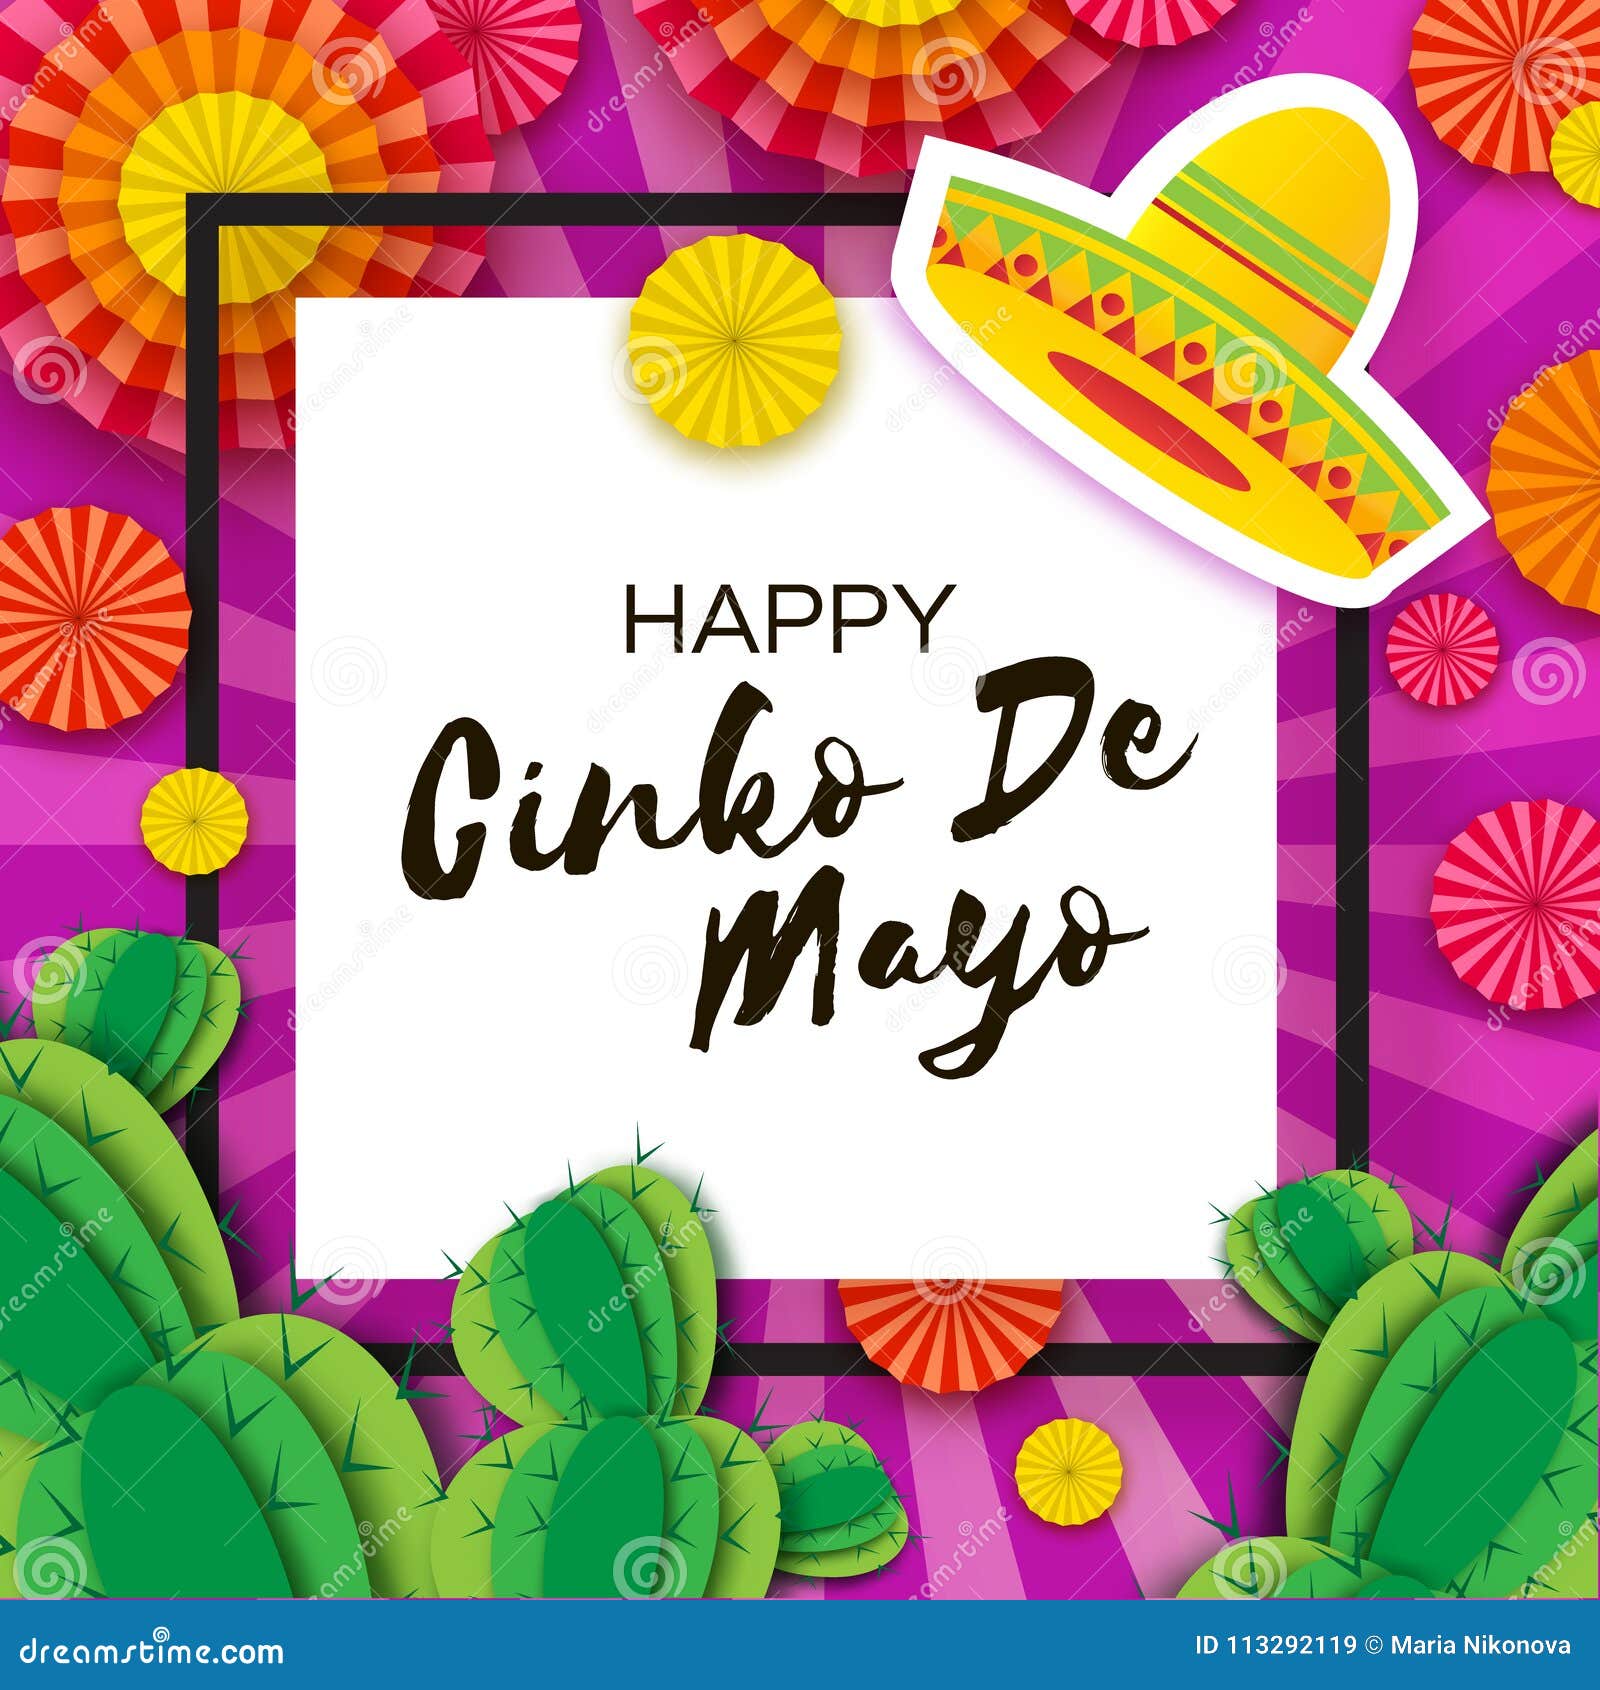 Happy Cinco De Mayo Greeting Card. Colorful Paper Fan and Cactus in Paper  Cut Style. Origami Sombrero Hat Stock Vector - Illustration of cinco, mayo:  113292119